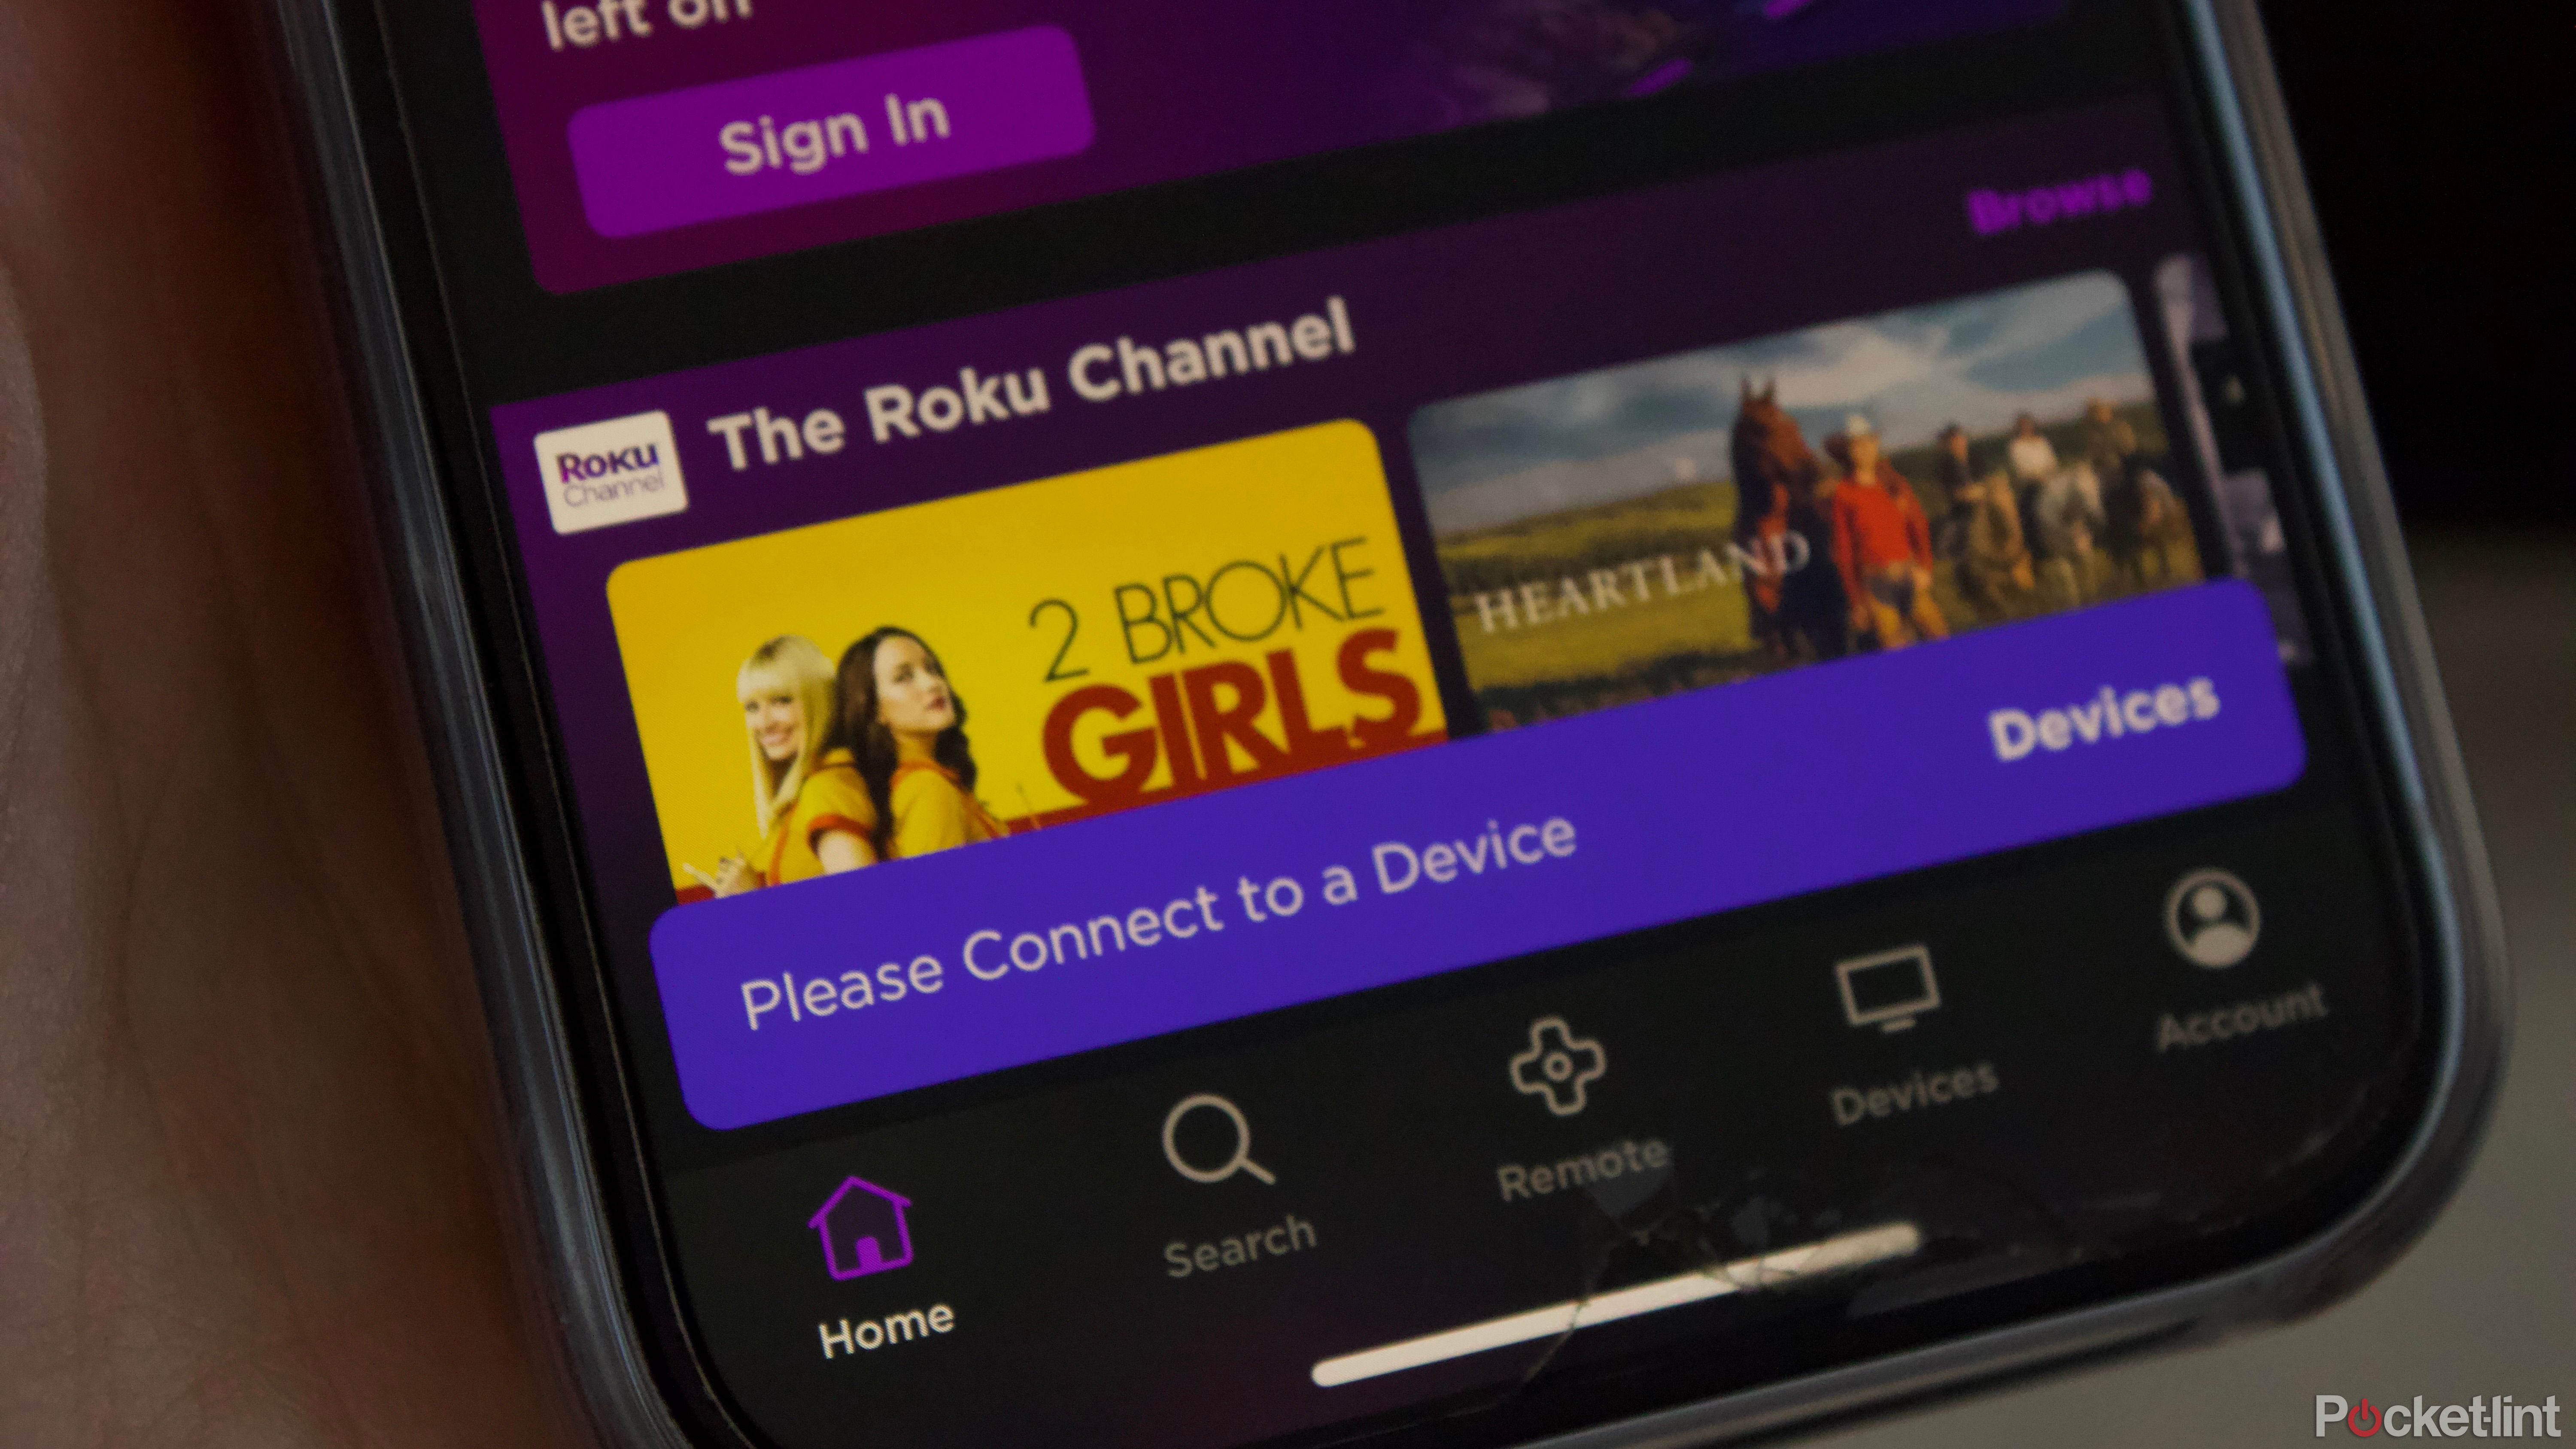 Connecting to a device on Roku app via iPhone